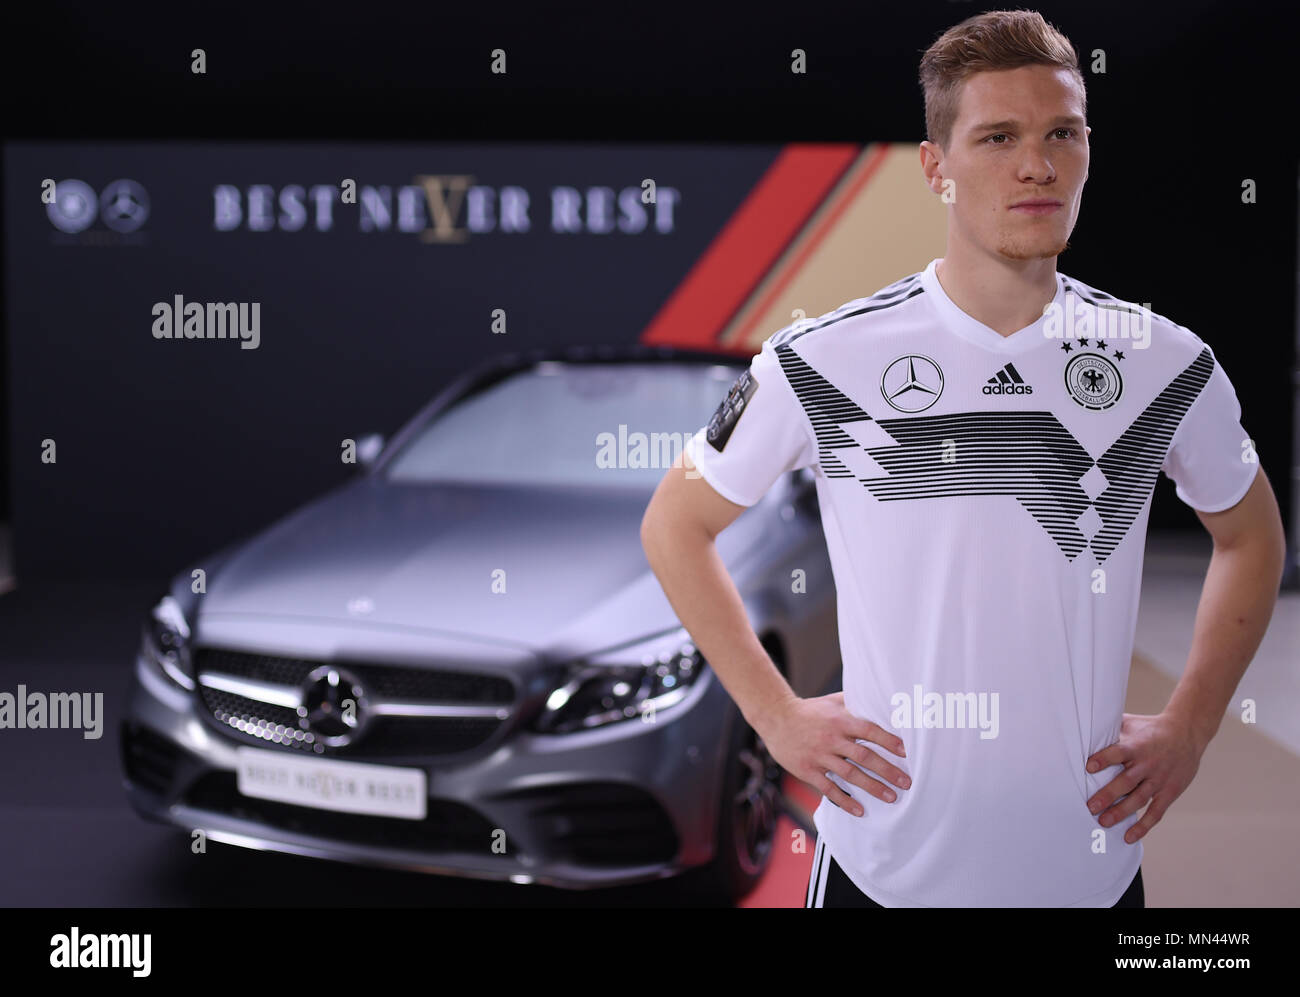 Marcel Halstenberg (Germany) on the Mercedes-Benz C 400 4Matic. Rear: The  World Cup logo of the Mercedes-Benz Generalsupplier (# BEST NEVER REST)  Preview/Archive Image: Topic of the Caderbekanntgabe on 15.05.2018- GES/ Football/DFB Marketing